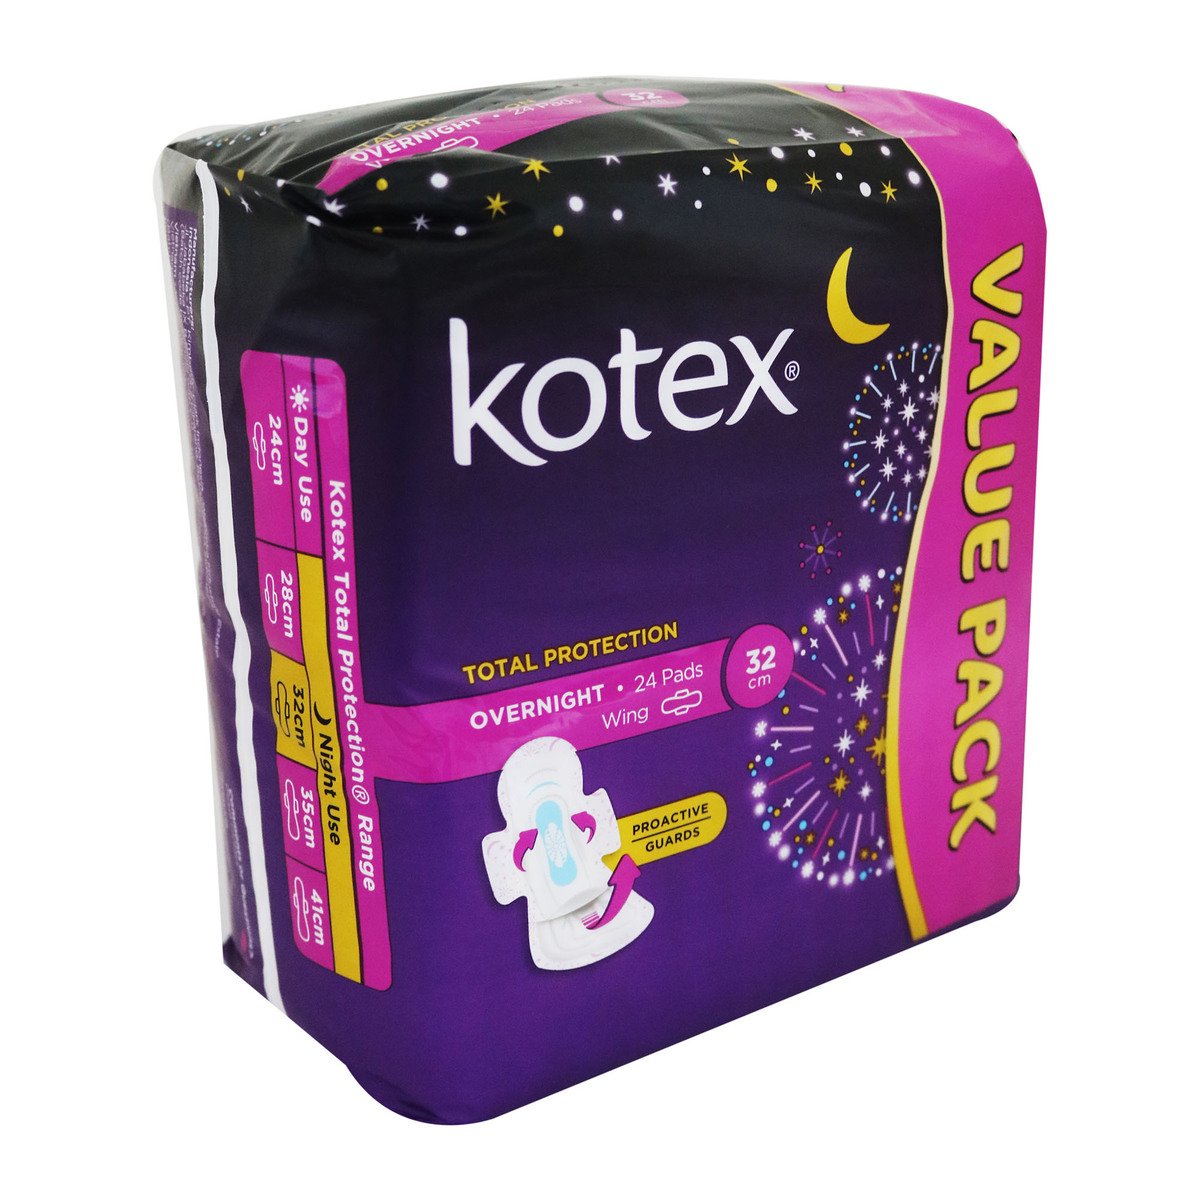 Kotex Soft Side Overnight Pro Active Guards Wing 32Cm 24 Counts